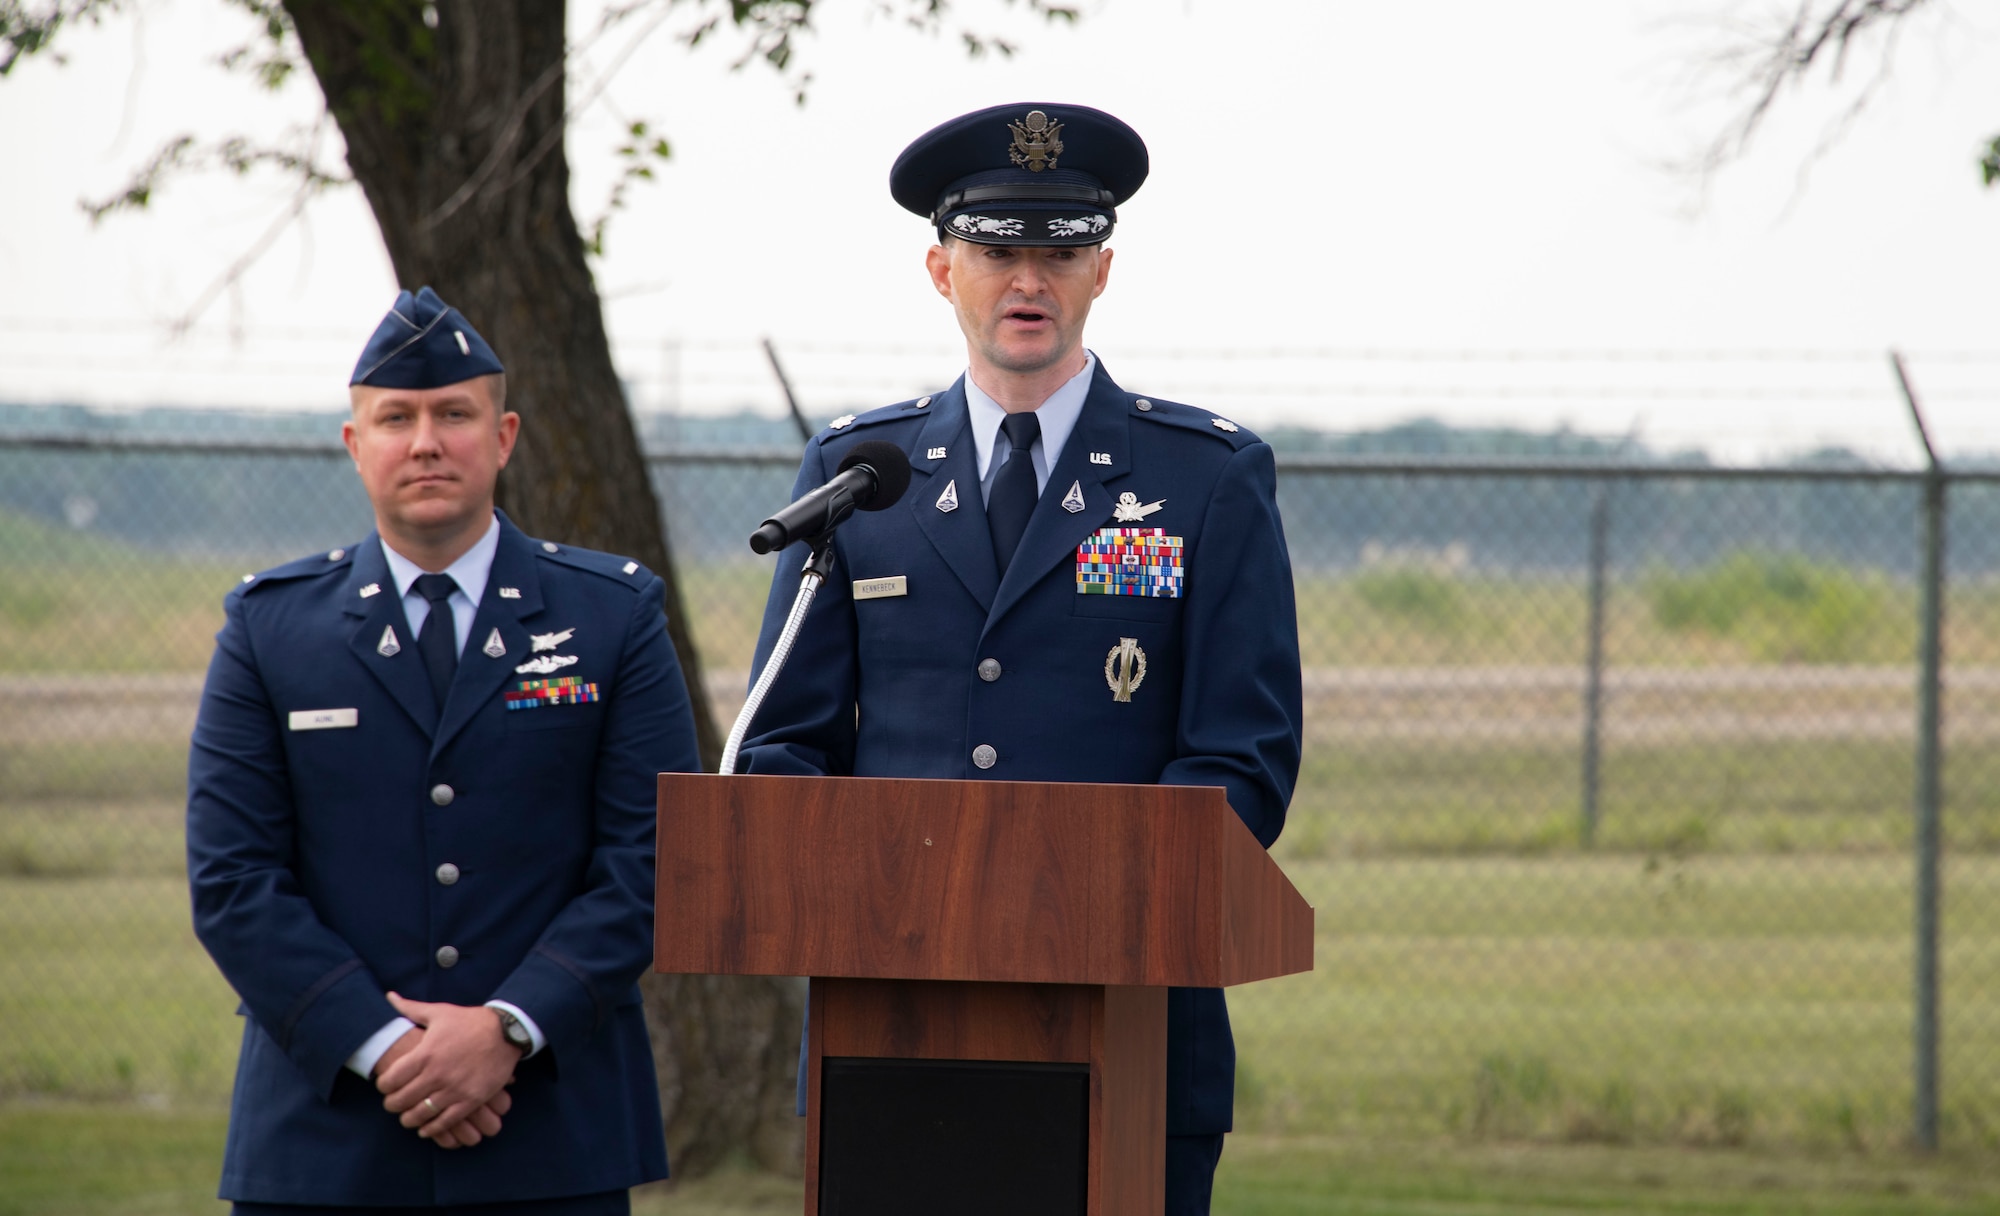 Lt. Col. Travis Kennebeck, 10th Space Warning Squadron commander, gives a speech during the renaming ceremony at Cavalier Space Force Station, N.D., July 30, 2021.